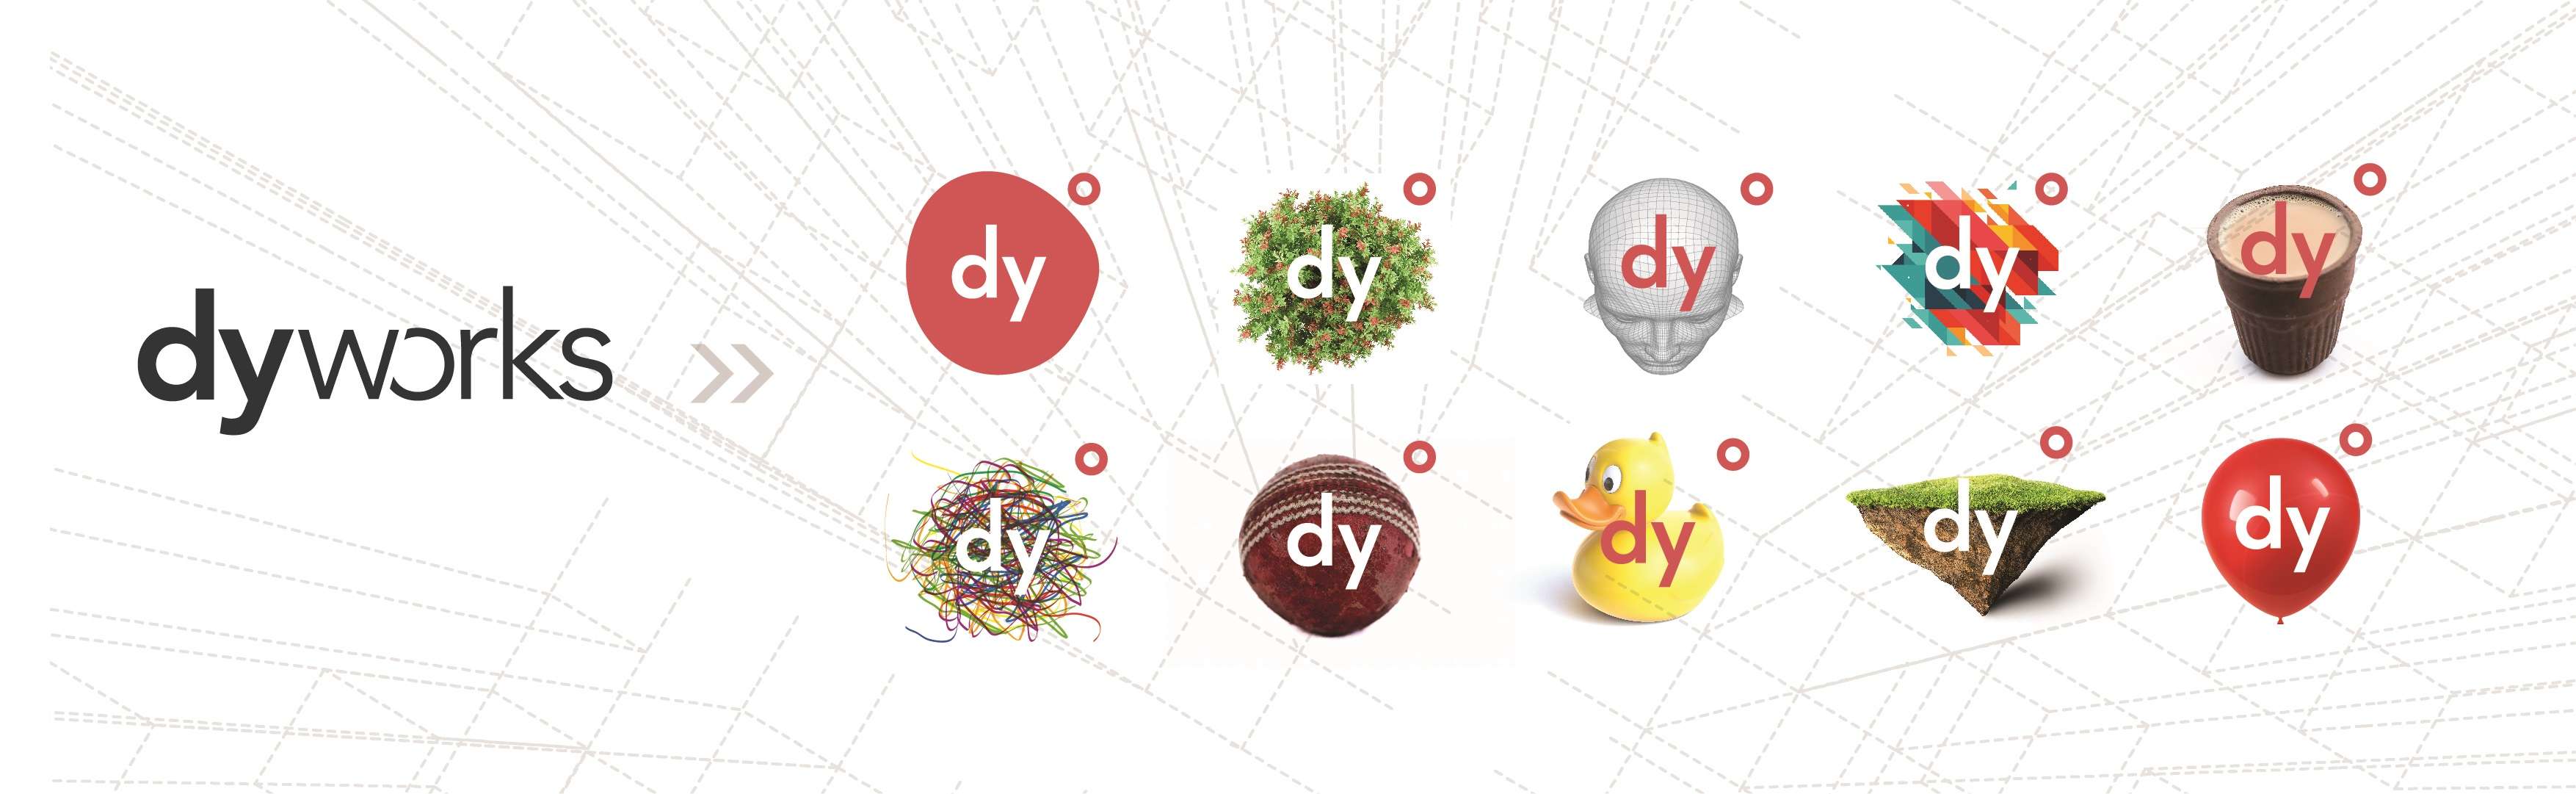 DY Works undergoes rebranding to offer human-centric business design, ET BrandEquity